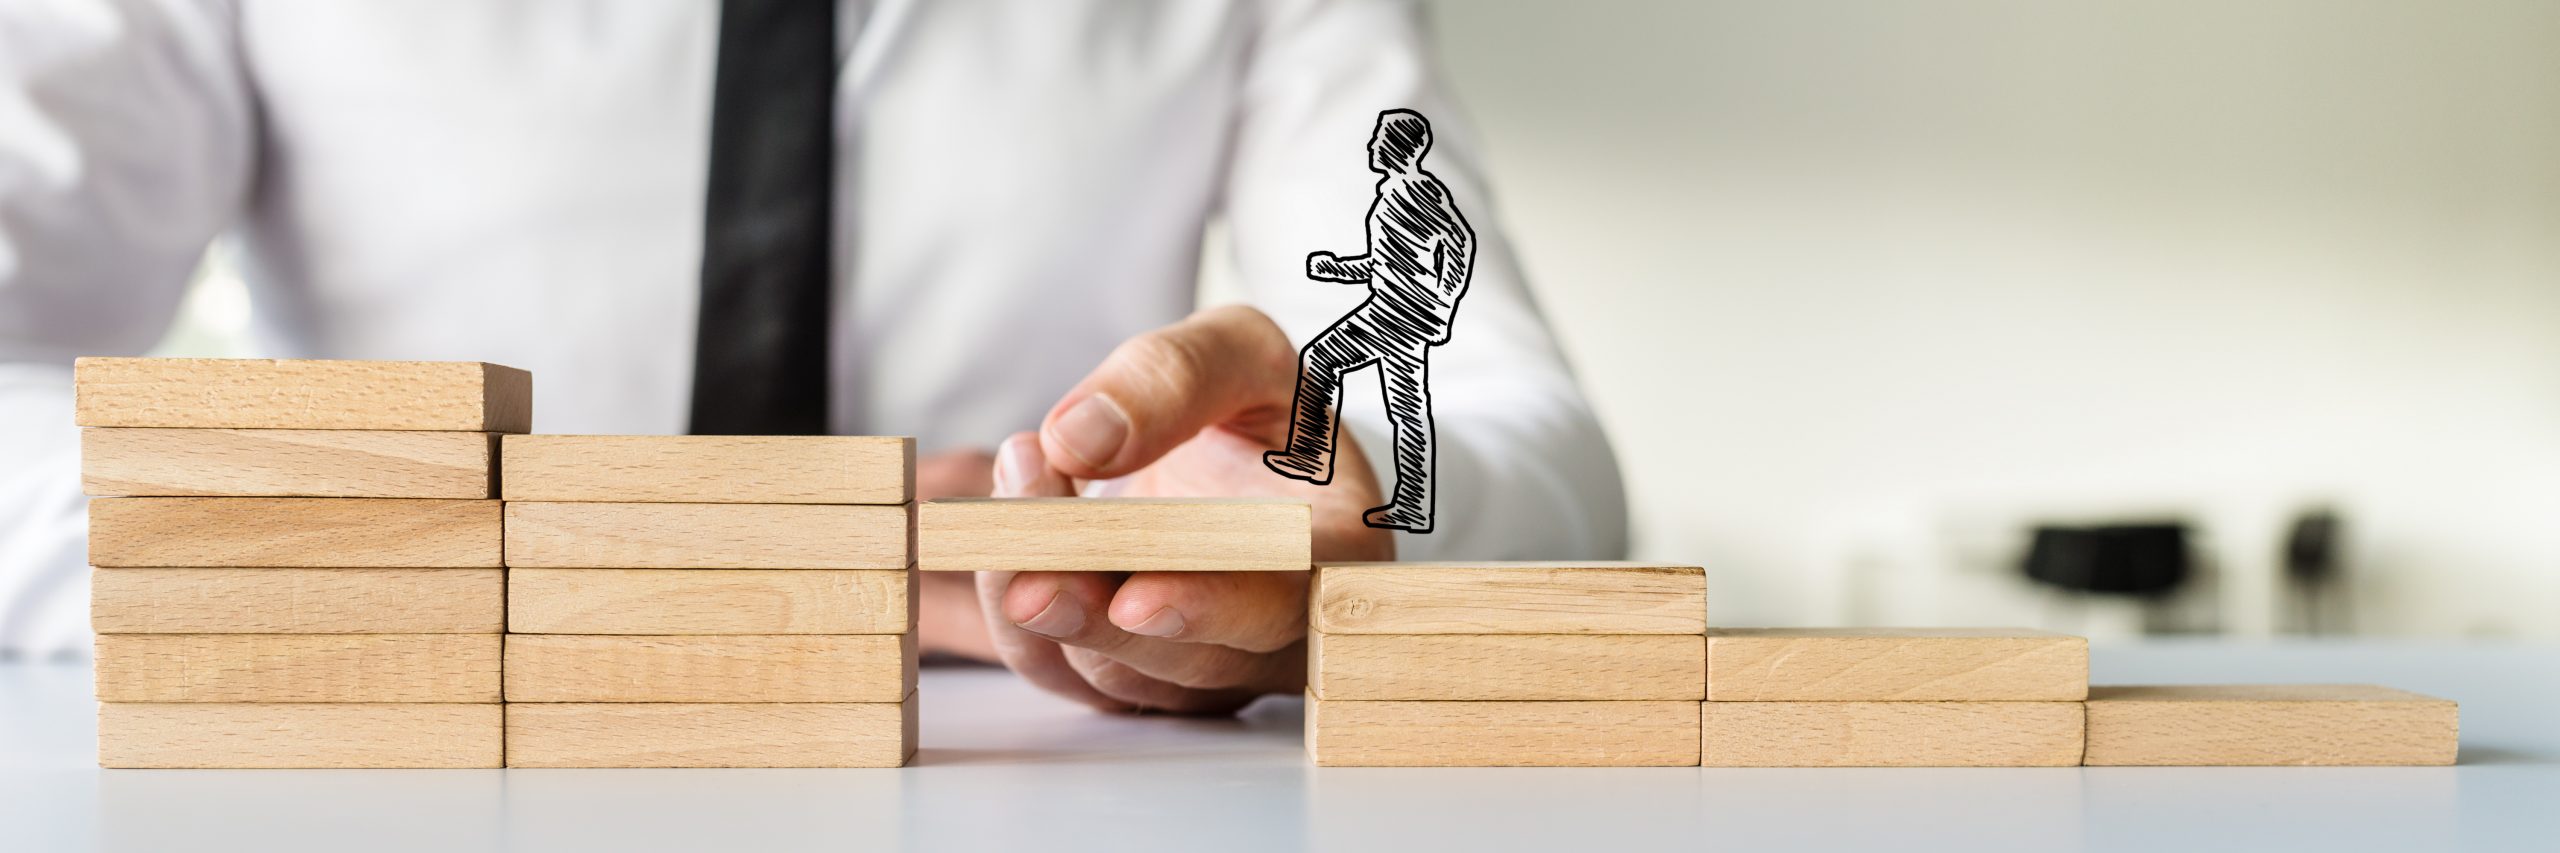 Hand drawn shape of a businessman walking up the wooden steps supported by hand, symbolizing the role of mid-level programs in the donor pipeline.